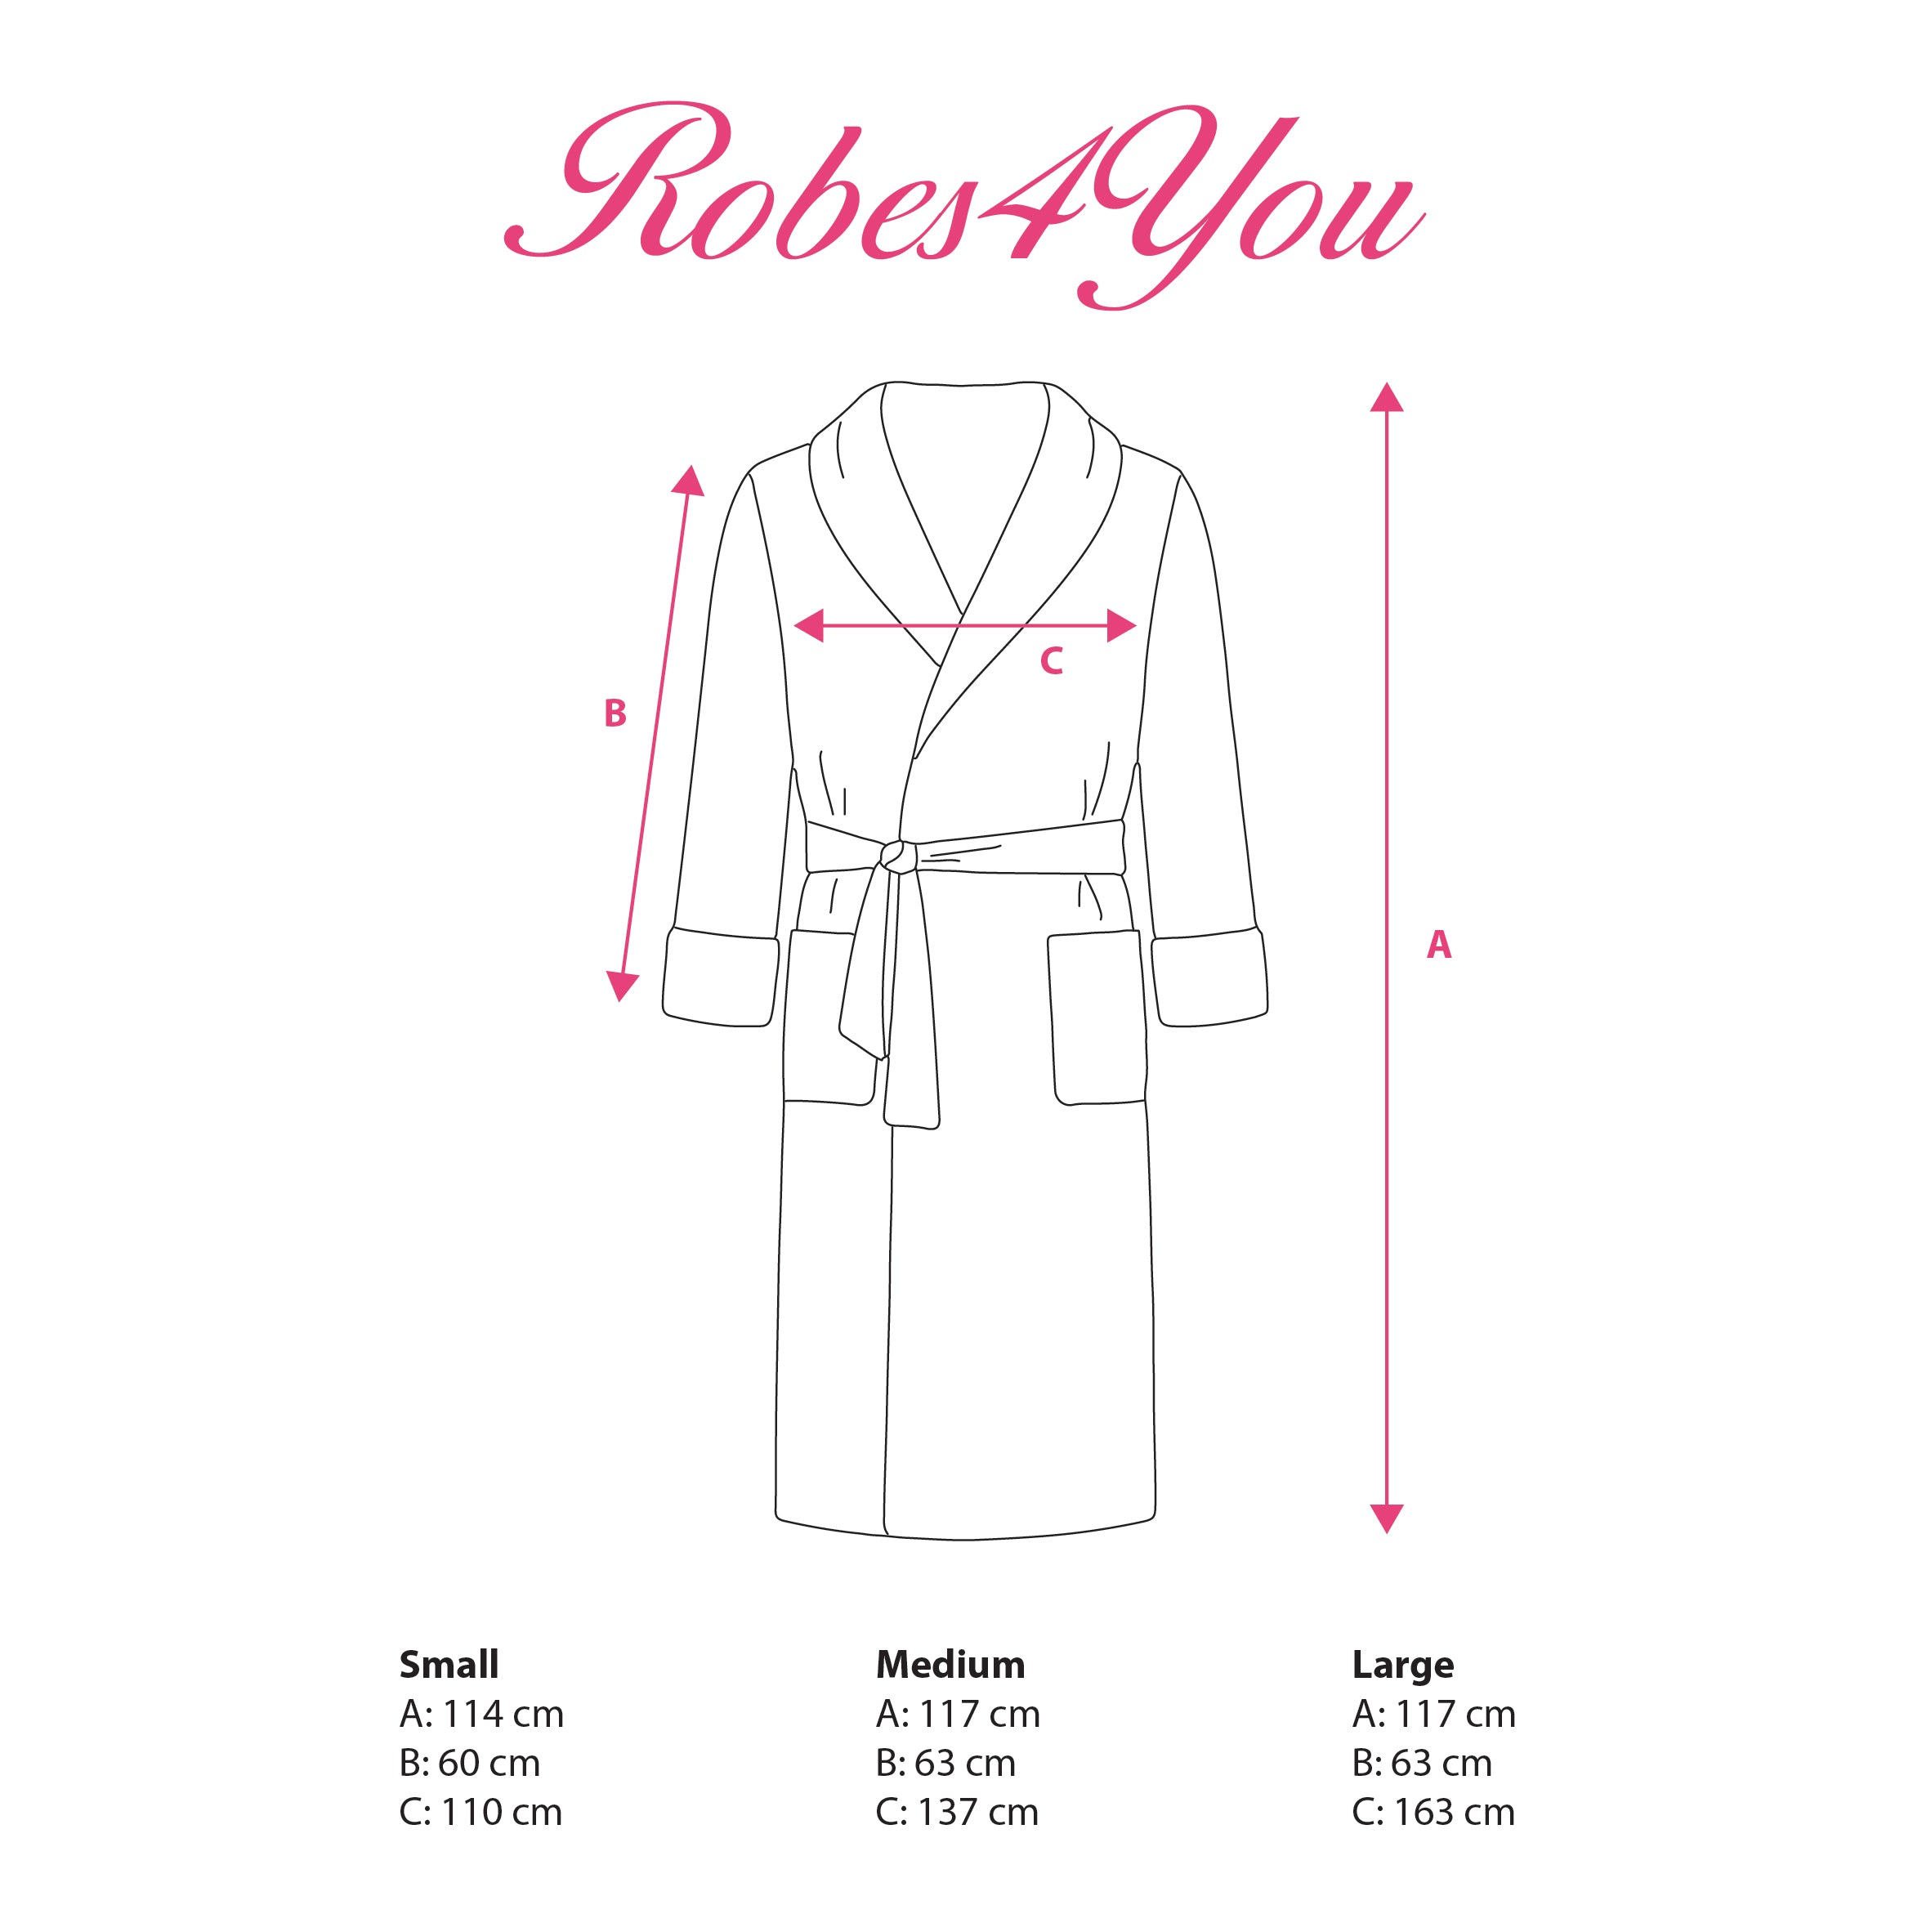 Robes4you adult robe sizing. 